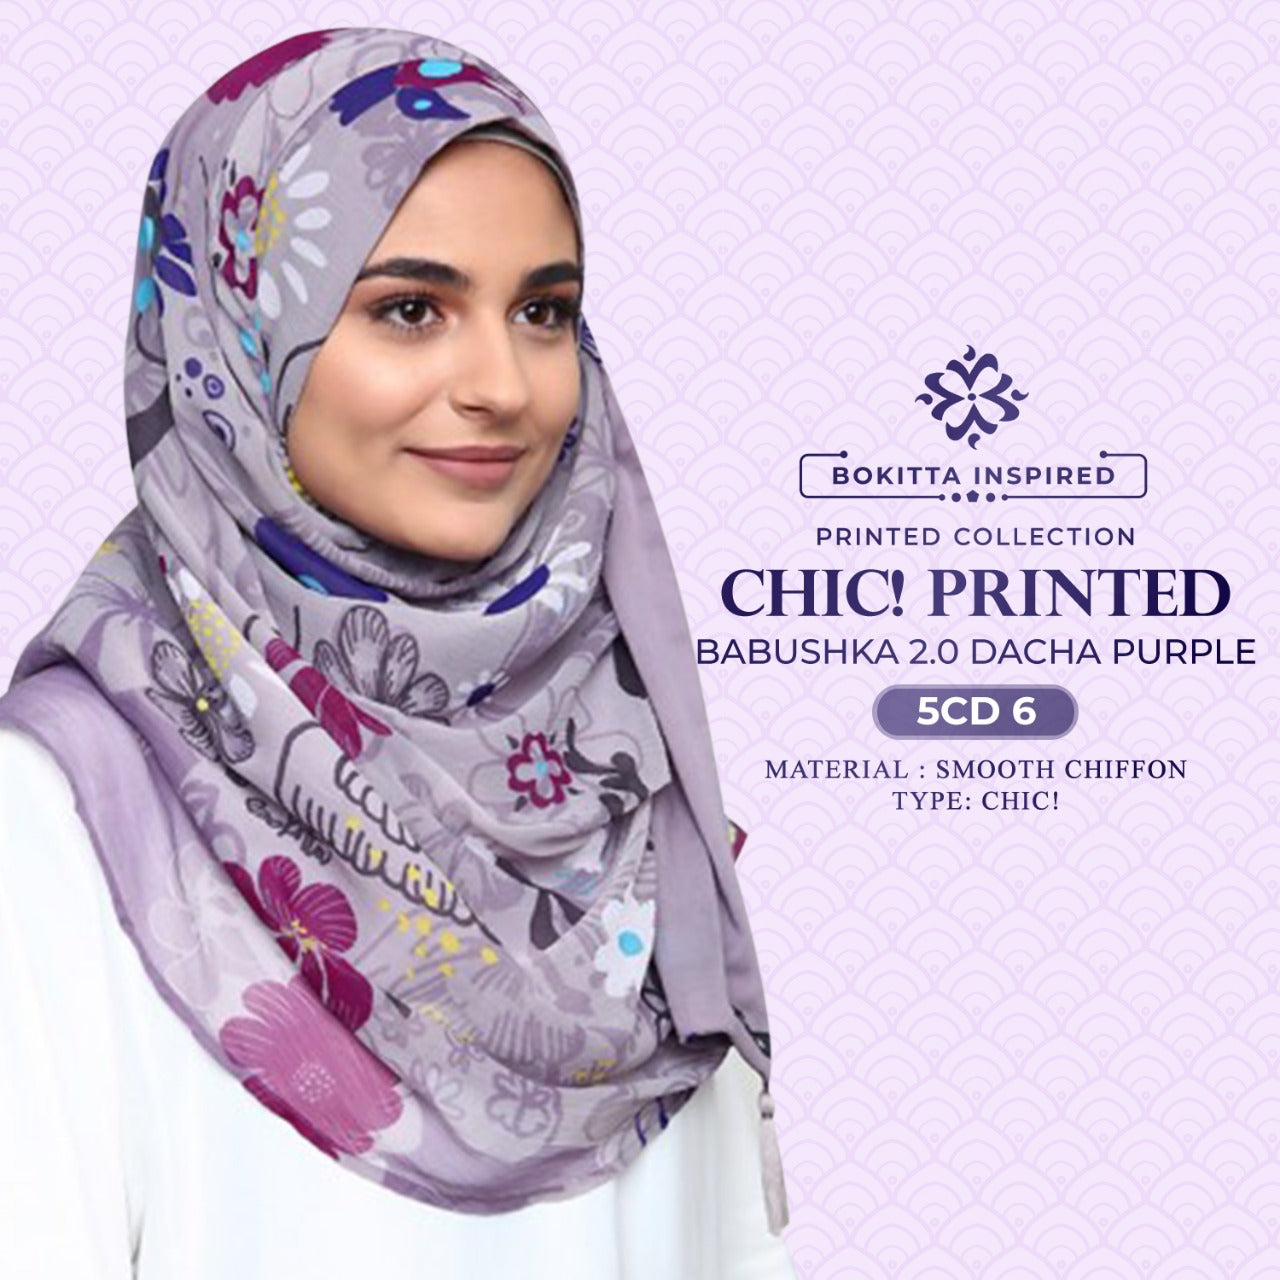 Bokitta Chic! Printed Best Seller Collection 3.0 RM19